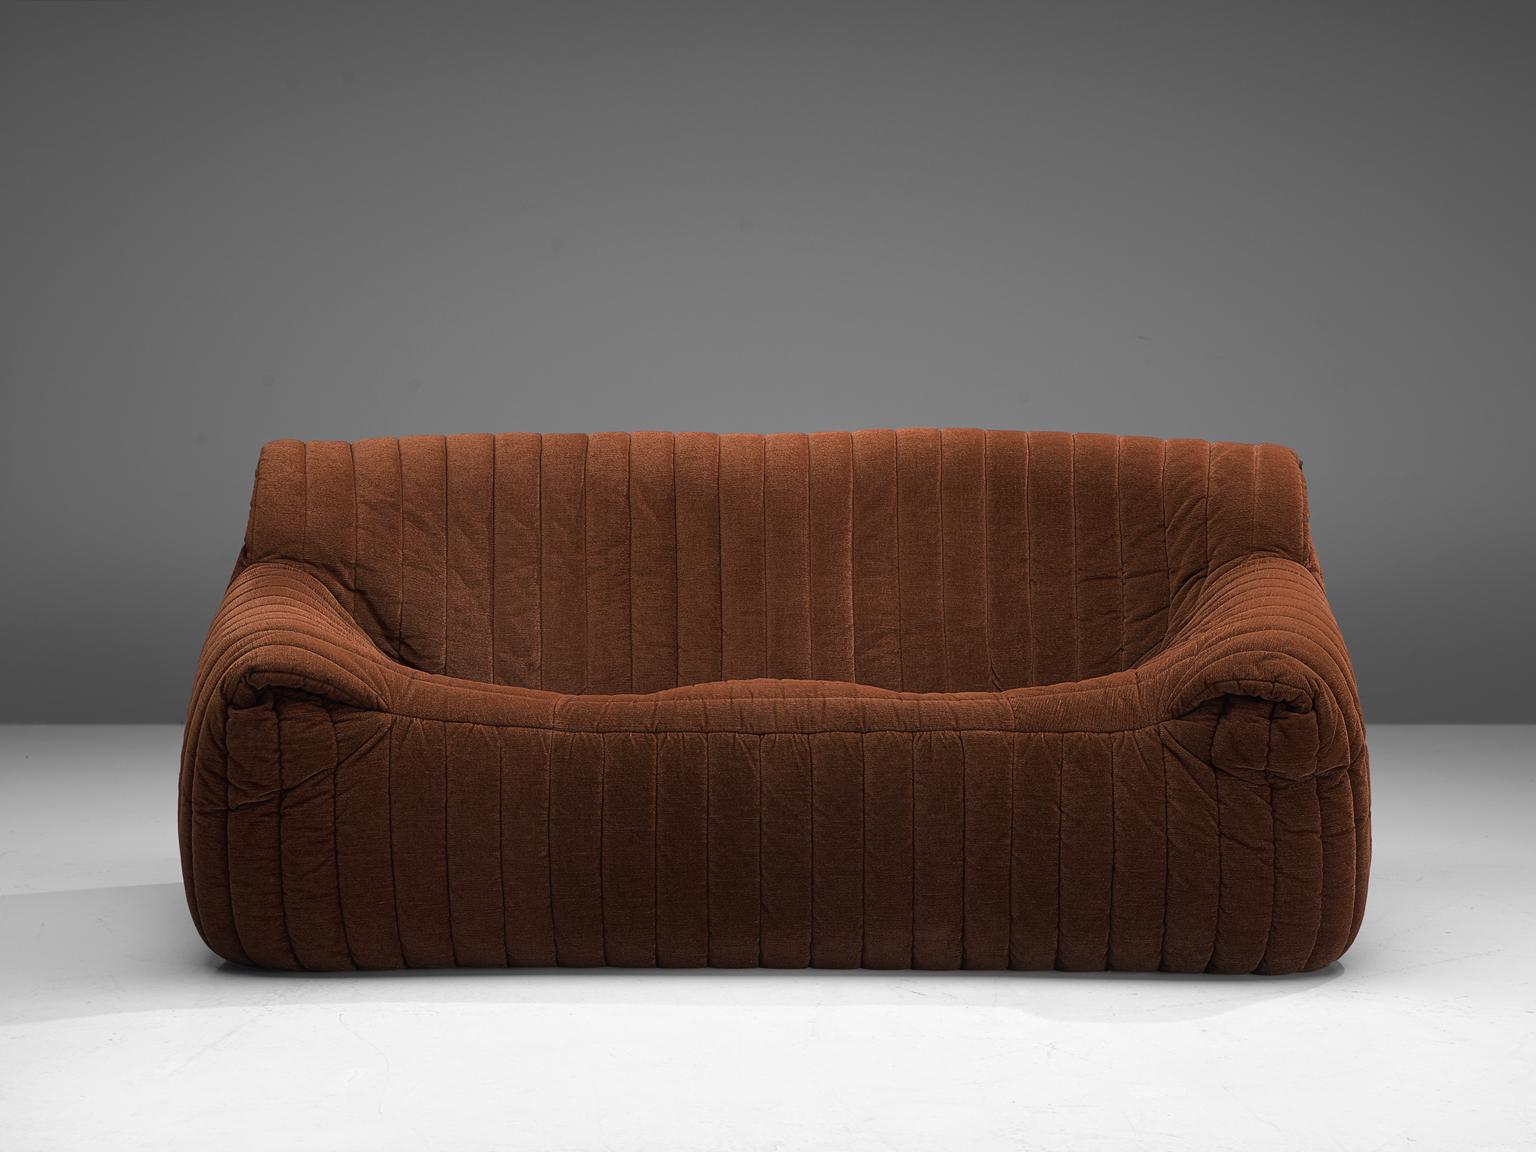 Annie Hiéronimus for Cinna (Ligne Roset), sofa model 'Sandra', fabric, France, circa 1977.

This comfortable and grand 'Sandra' two-seat sofa is designed by Annie Hiéronimus. This model features a solid base with a rounded, bulky seat and a high